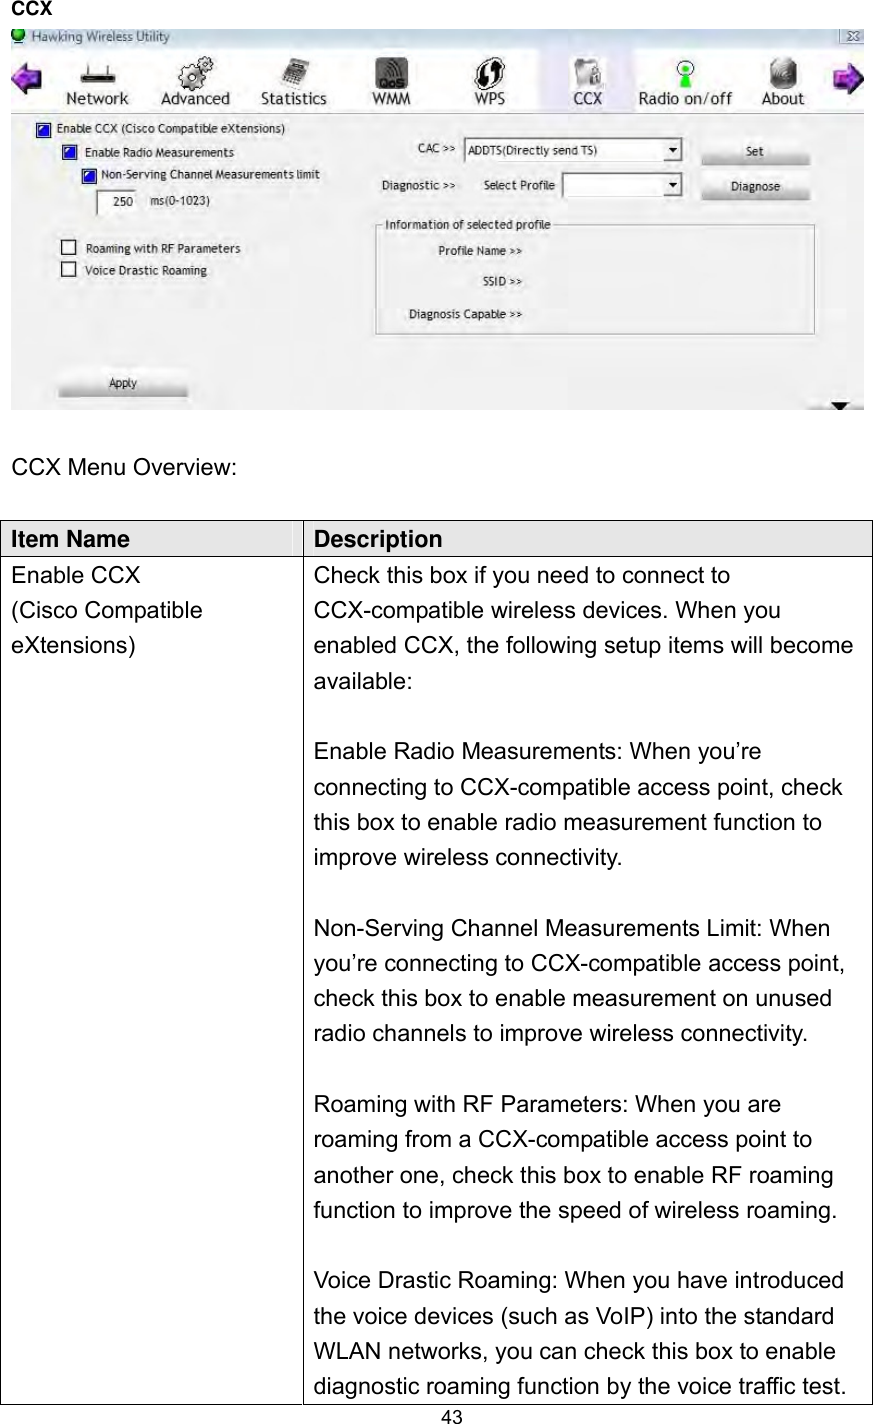  43 CCX    CCX Menu Overview:  Item Name  Description Enable CCX (Cisco Compatible eXtensions) Check this box if you need to connect to CCX-compatible wireless devices. When you enabled CCX, the following setup items will become available:  Enable Radio Measurements: When you’re connecting to CCX-compatible access point, check this box to enable radio measurement function to improve wireless connectivity.  Non-Serving Channel Measurements Limit: When you’re connecting to CCX-compatible access point, check this box to enable measurement on unused radio channels to improve wireless connectivity.  Roaming with RF Parameters: When you are roaming from a CCX-compatible access point to another one, check this box to enable RF roaming function to improve the speed of wireless roaming.  Voice Drastic Roaming: When you have introduced the voice devices (such as VoIP) into the standard WLAN networks, you can check this box to enable diagnostic roaming function by the voice traffic test.   